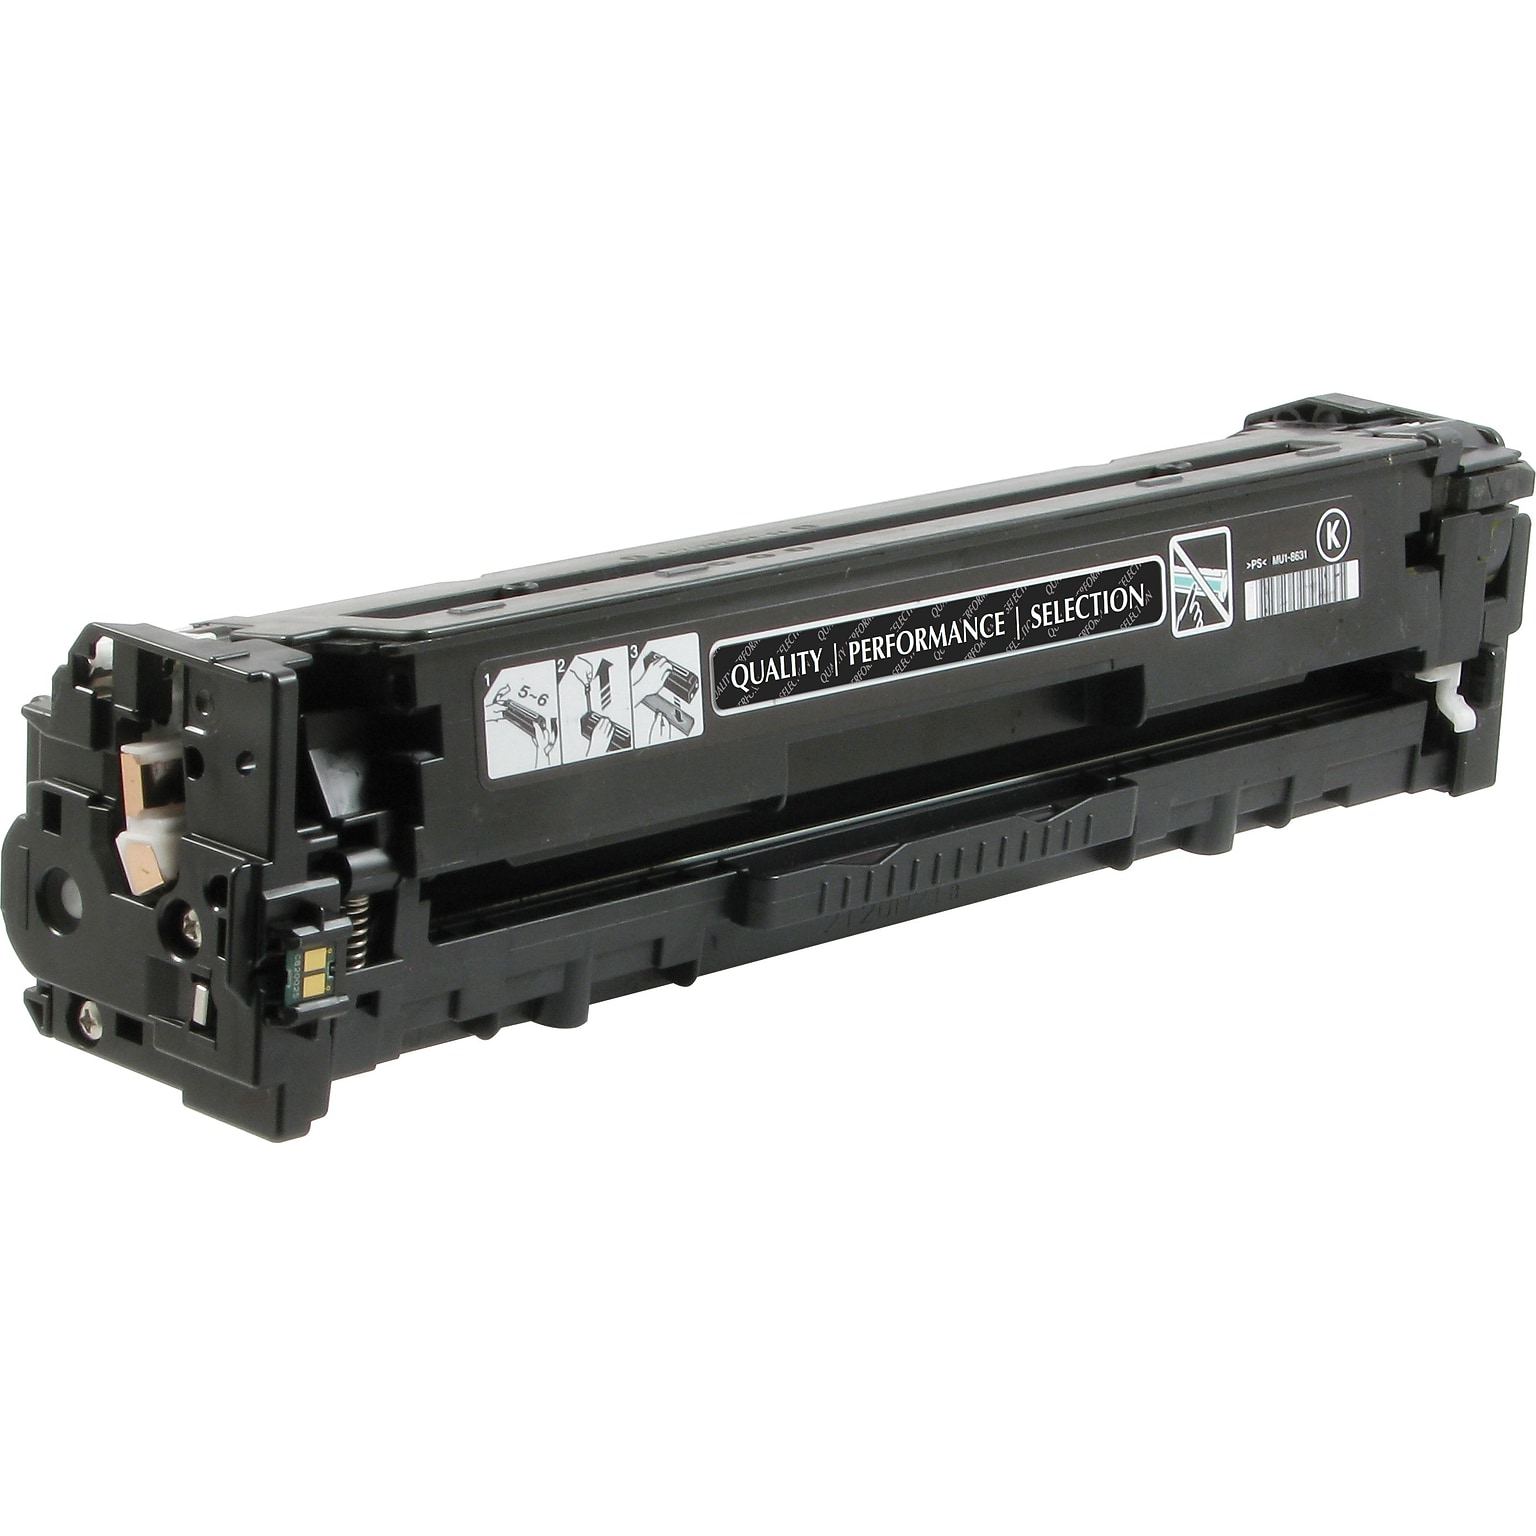 Quill Brand® Remanufactured Black High Yield Toner Cartridge Replacement for HP 131X (CF210X) (Lifetime Warranty)